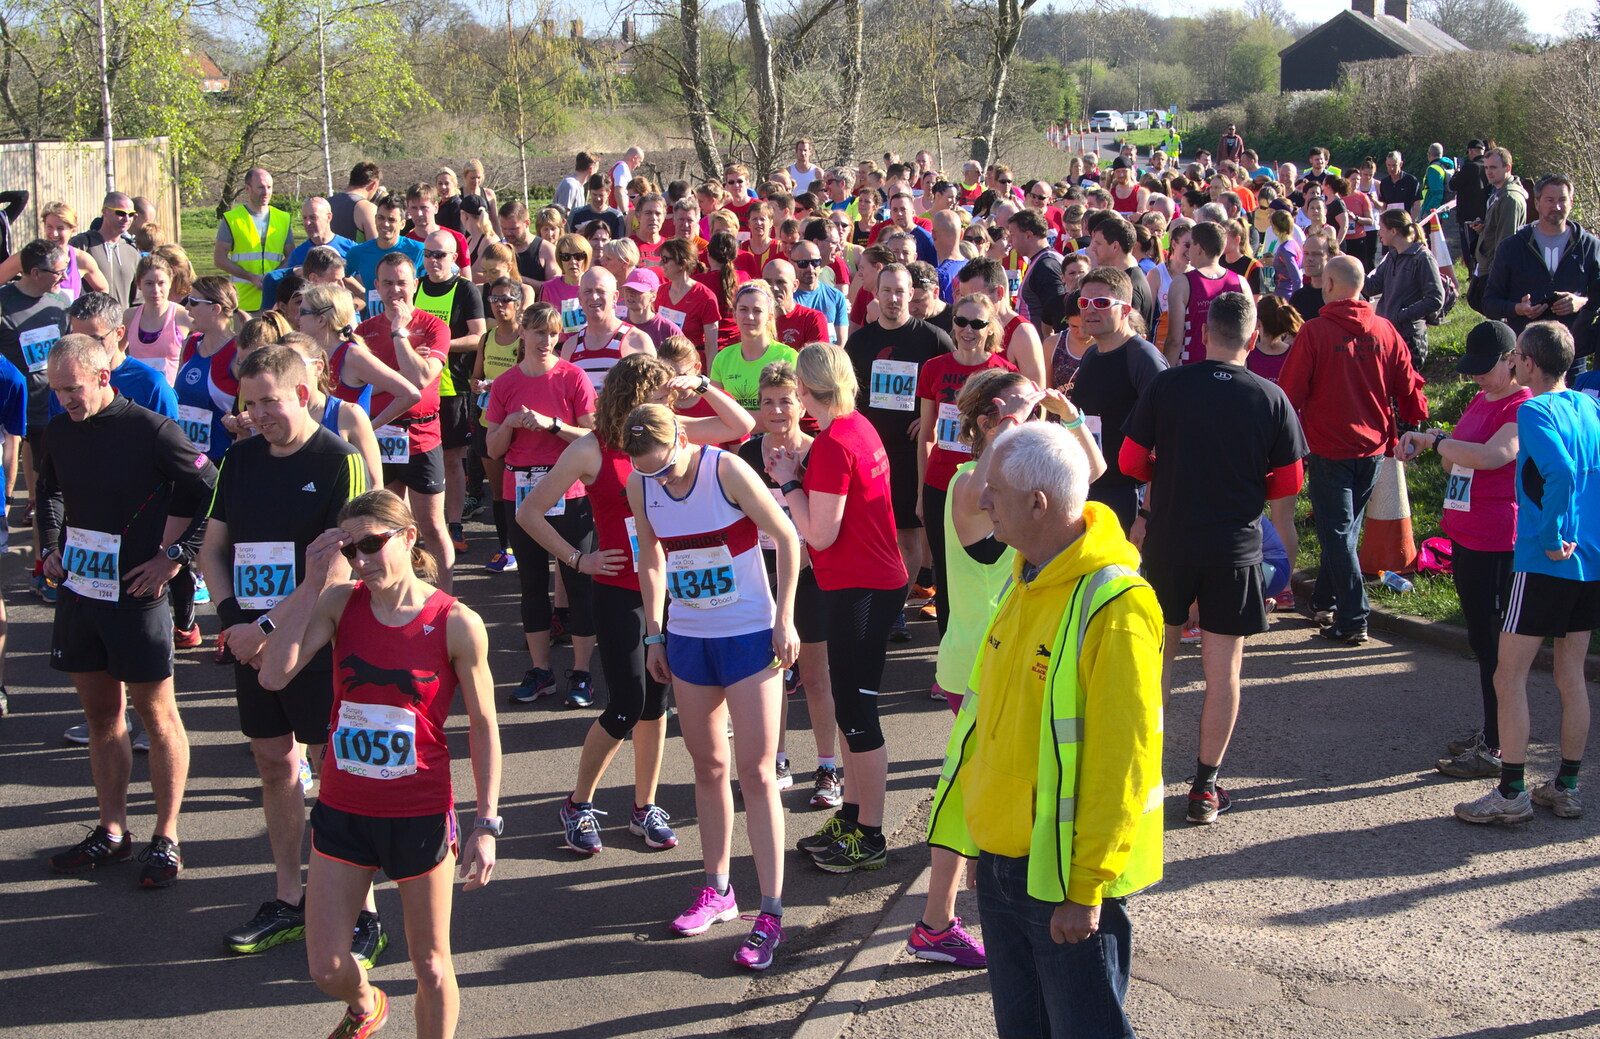 A load of 10k/6 mile runners assembles from The Black Dog Festival of Running, Bungay, Suffolk - 2nd April 2017